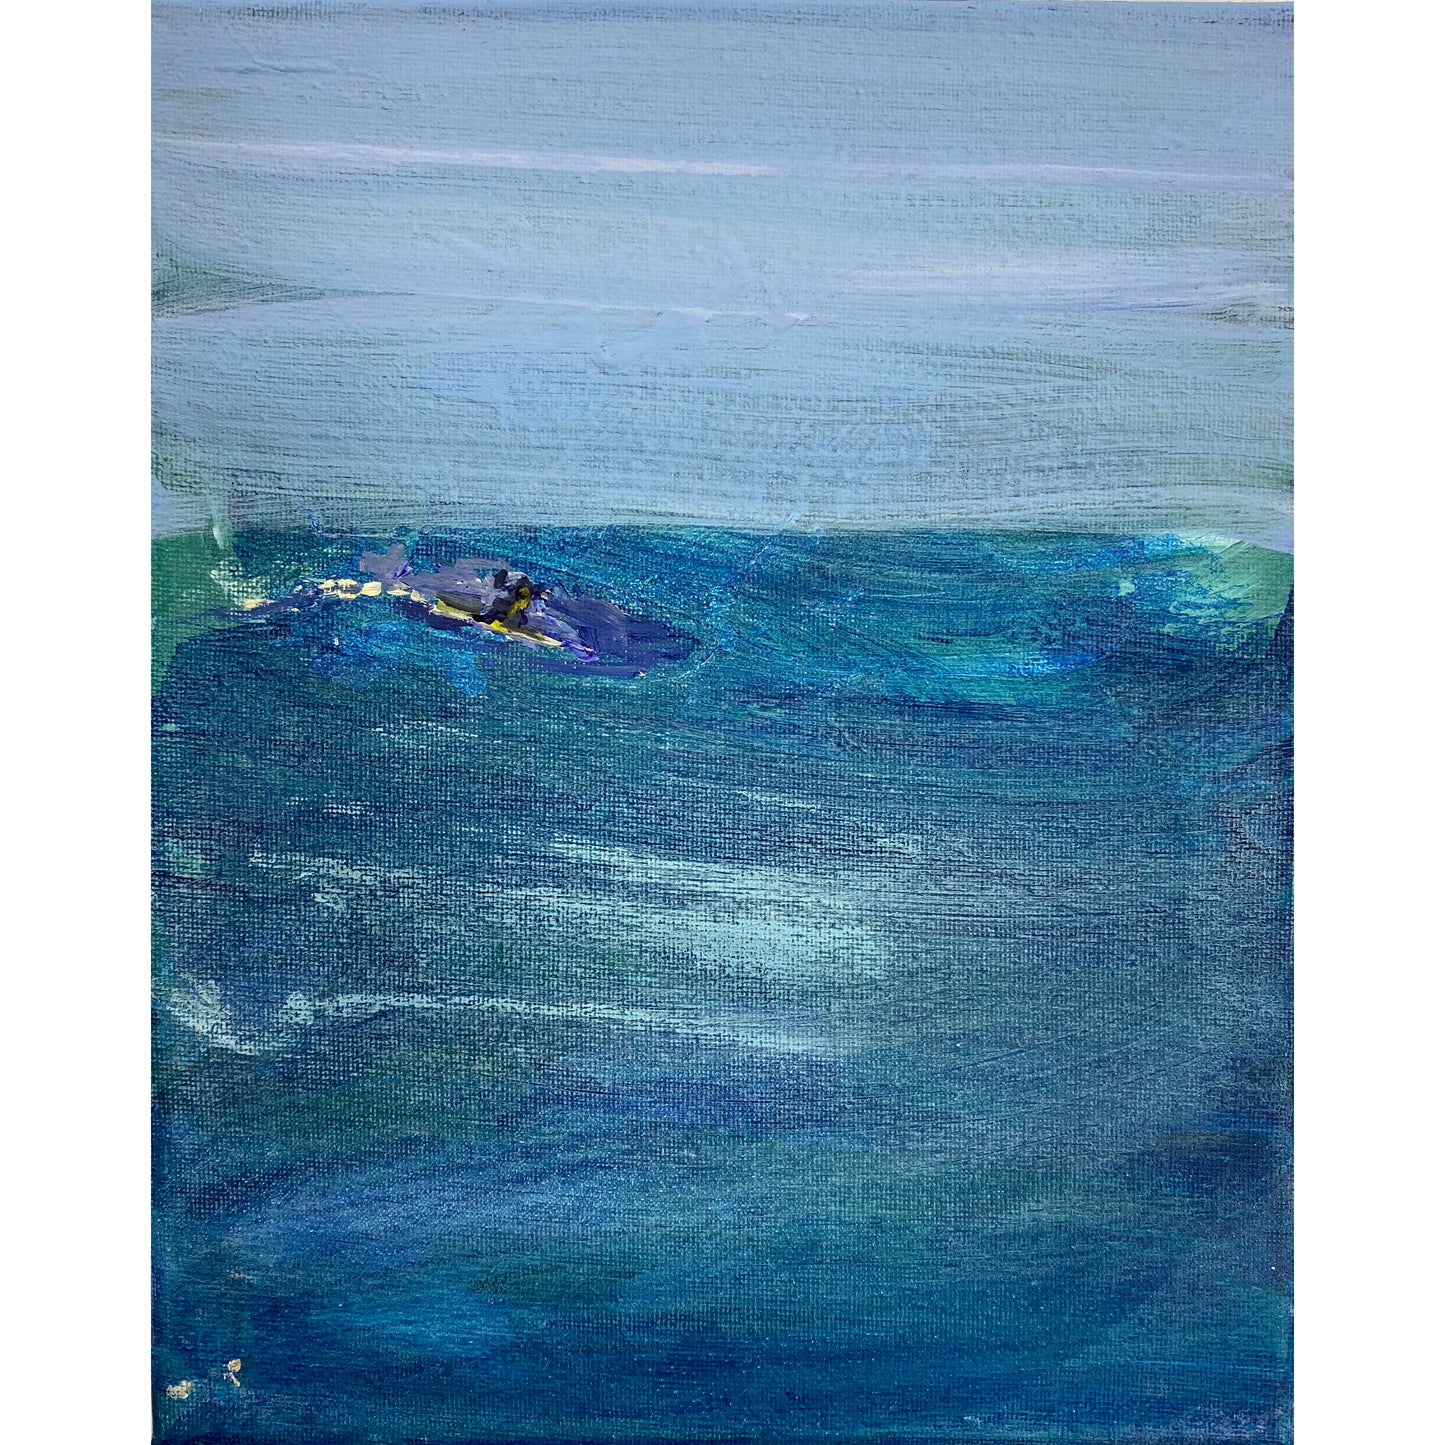 Acrylic Paint on Stretched Canvas, 10 x 8 Original Fine Art, Surfer made by Jeffrey Kohler-Crowe n